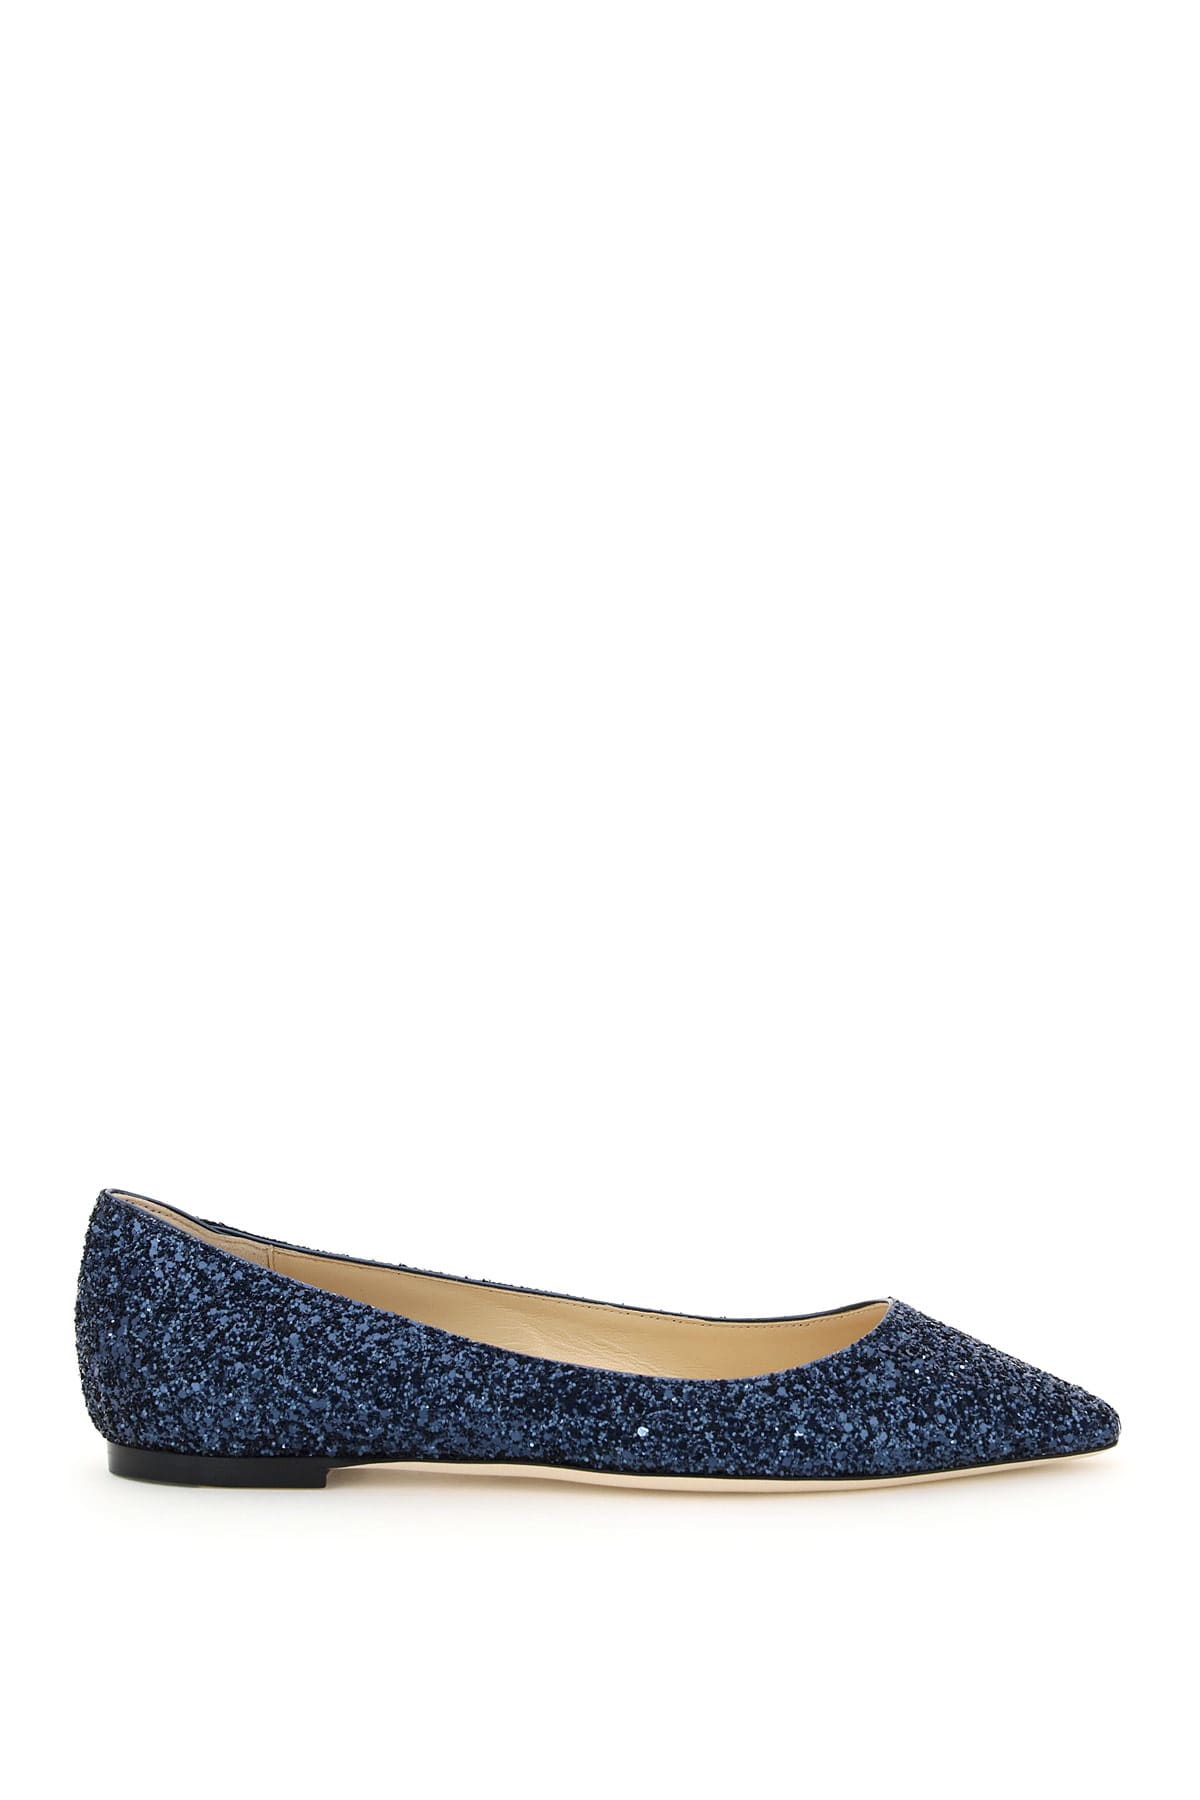 Buy Jimmy Choo Glitter Romy Flats online, shop Jimmy Choo shoes with free shipping